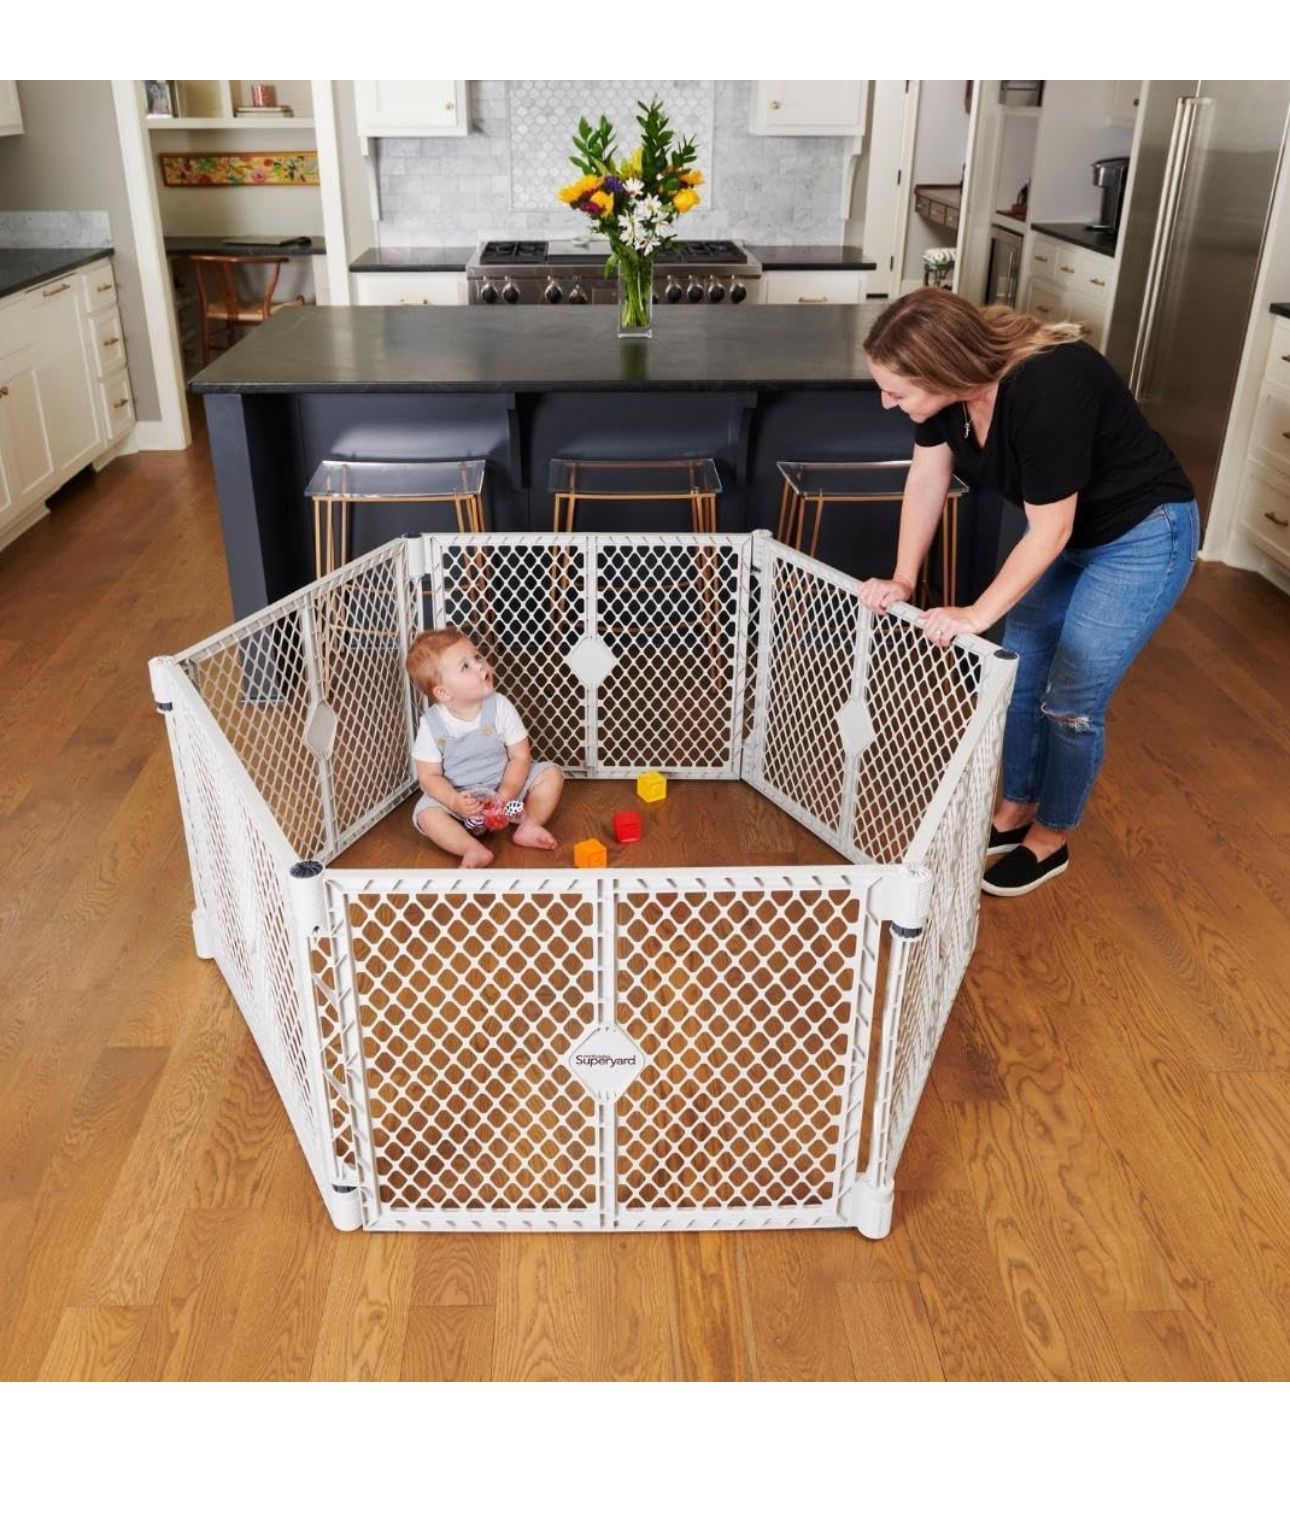 Toddleroo by North States Superyard 6 Panel Free Standing Play Yard, Indoor or Outdoor Baby Playpen, Baby Gate. Made in USA. 5.5 feet Corner to Corner